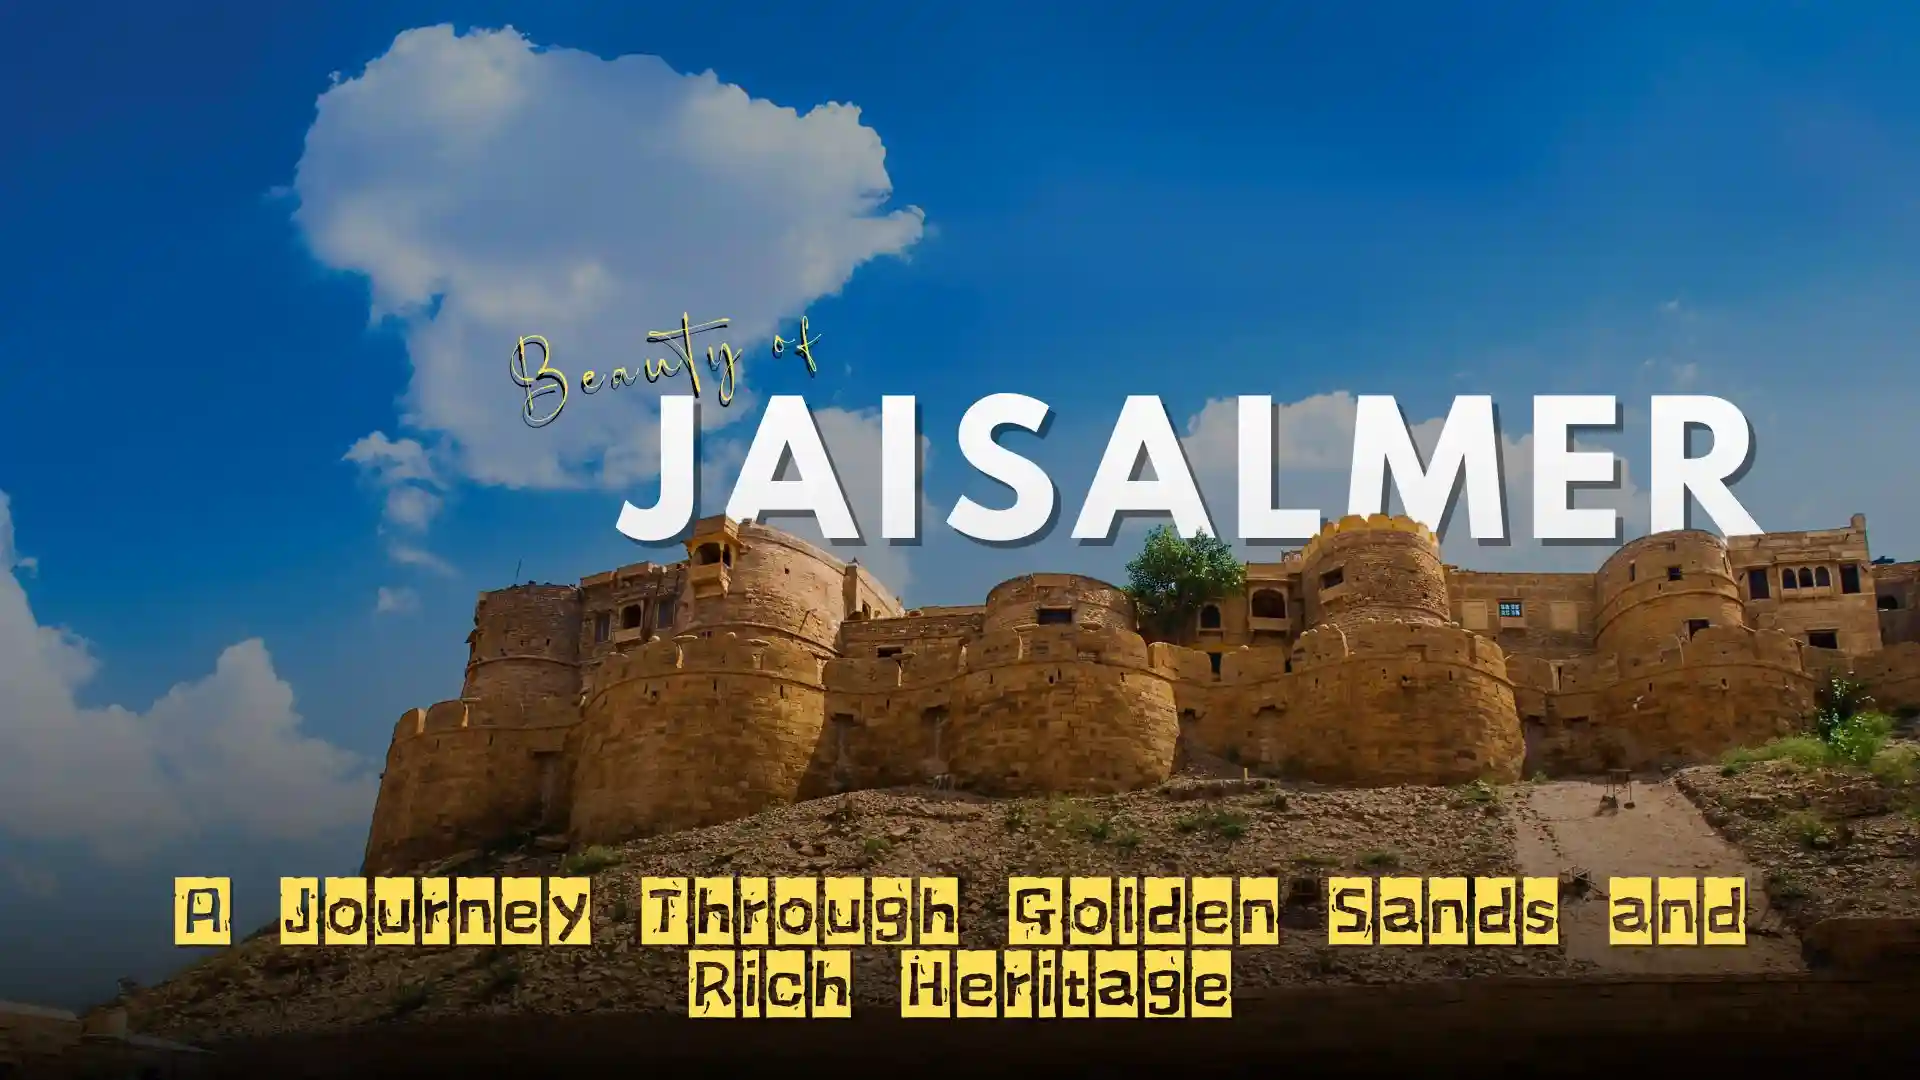 Beauty of Jaisalmer: A Journey Through Golden Sands and Rich Heritage